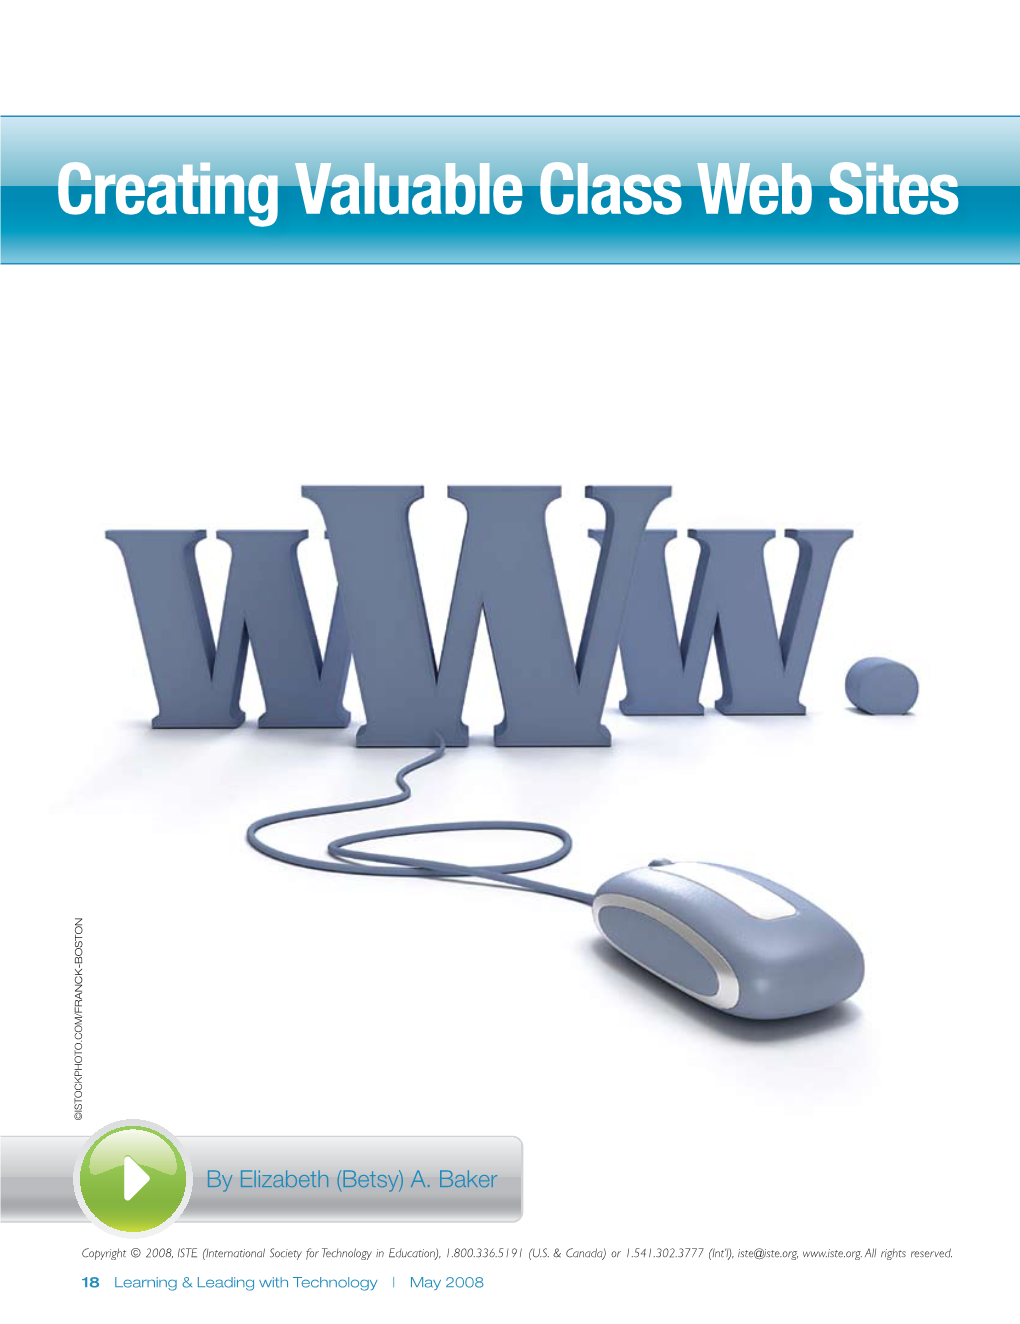 Creating Valuable Class Web Sites